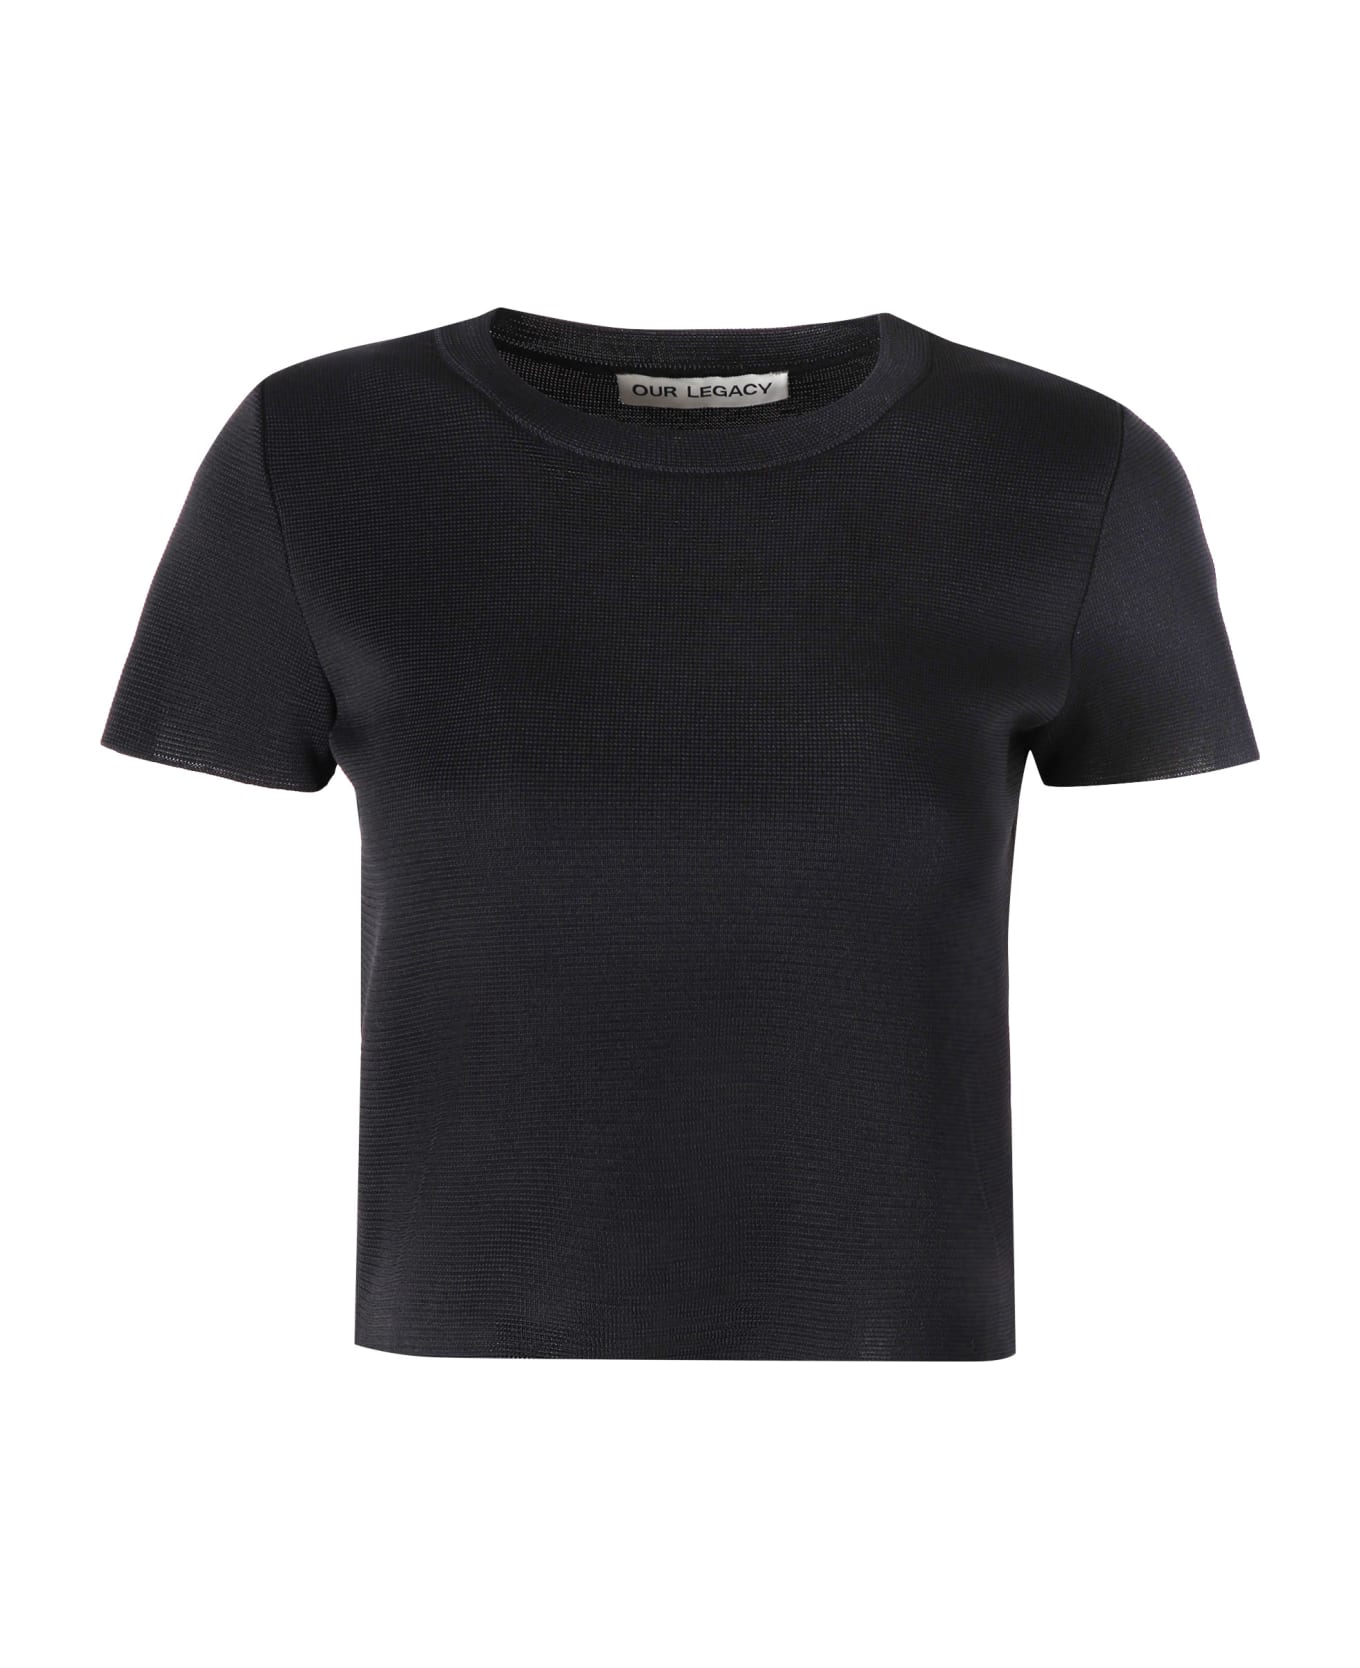 Our Legacy Knit Cropped T-shirt - black Tシャツ